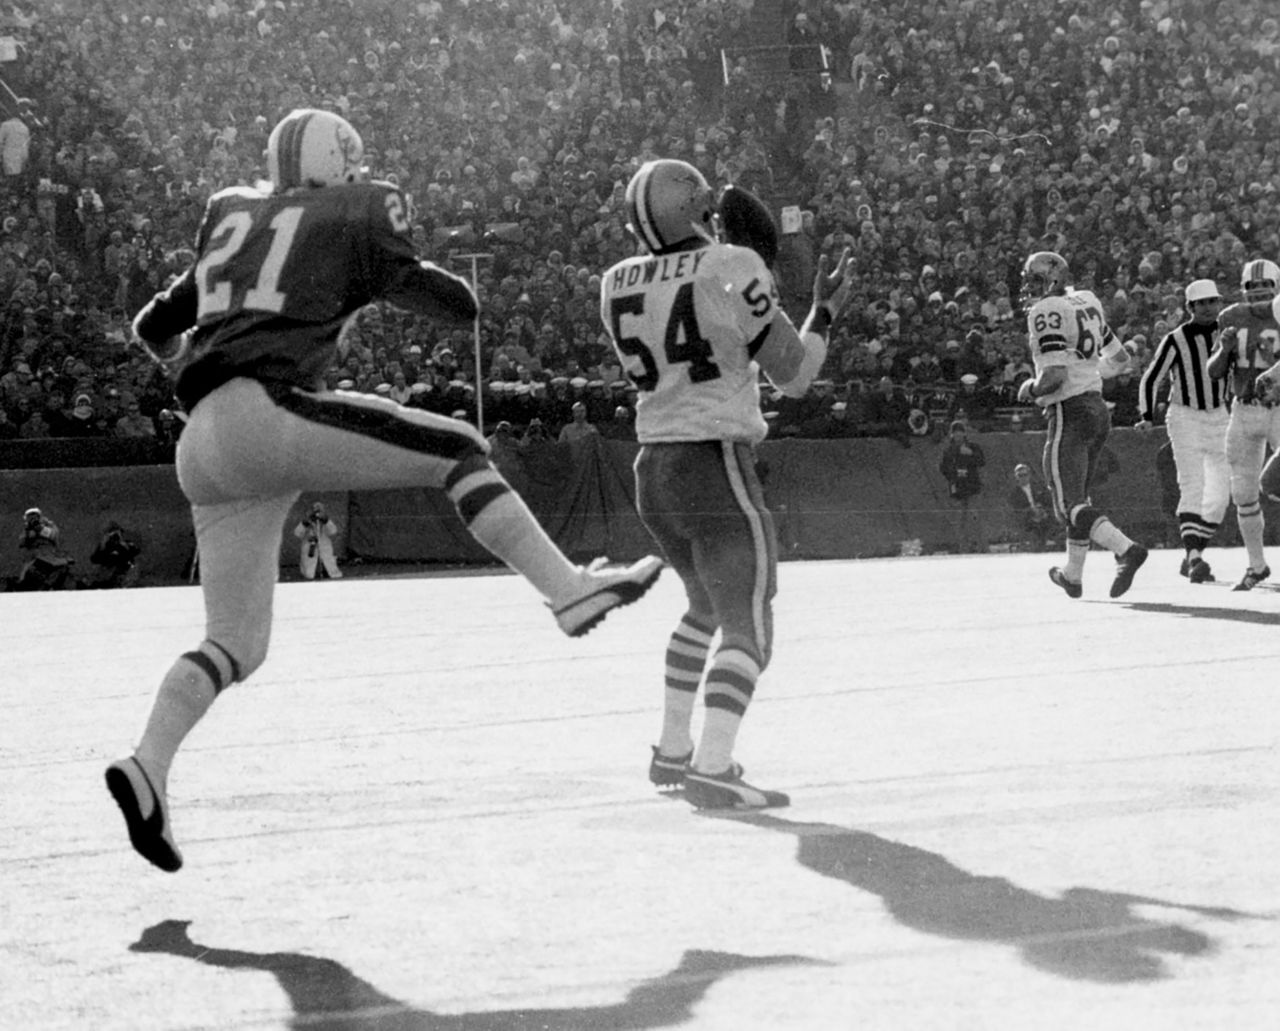 <strong>Super Bowl V (1971):</strong> Dallas Cowboys linebacker Chuck Howley intercepted two passes against the Baltimore Colts in Super Bowl V. Howley was named the game's MVP, but the Colts won the notoriously sloppy game with a Jim O'Brien field goal as time expired. To date, Howley remains the only player from a losing team to be named Super Bowl MVP. 